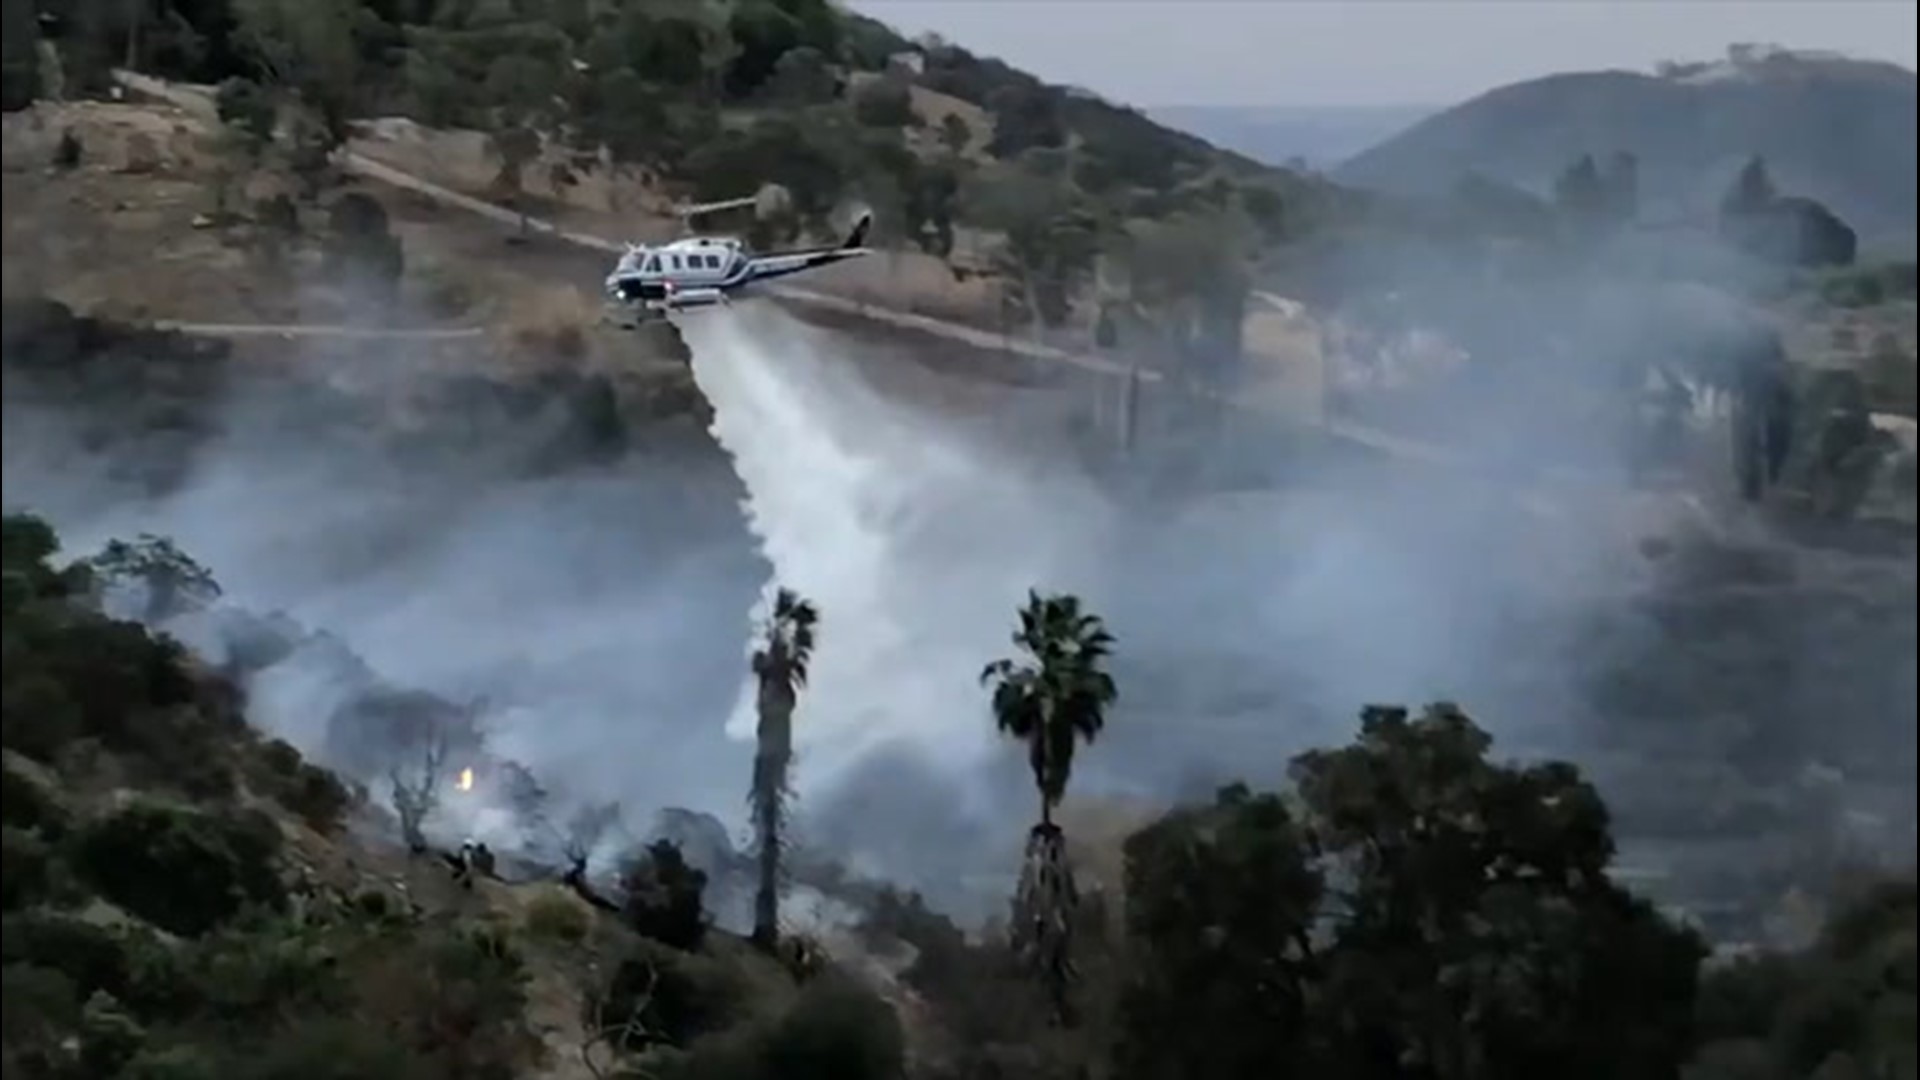 As multiple wildfires popped up across California on Jan. 19 with Santa Ana winds in the south and strong winds in the north, helicopter crews helped stopped the spread of the Ledge Fire.